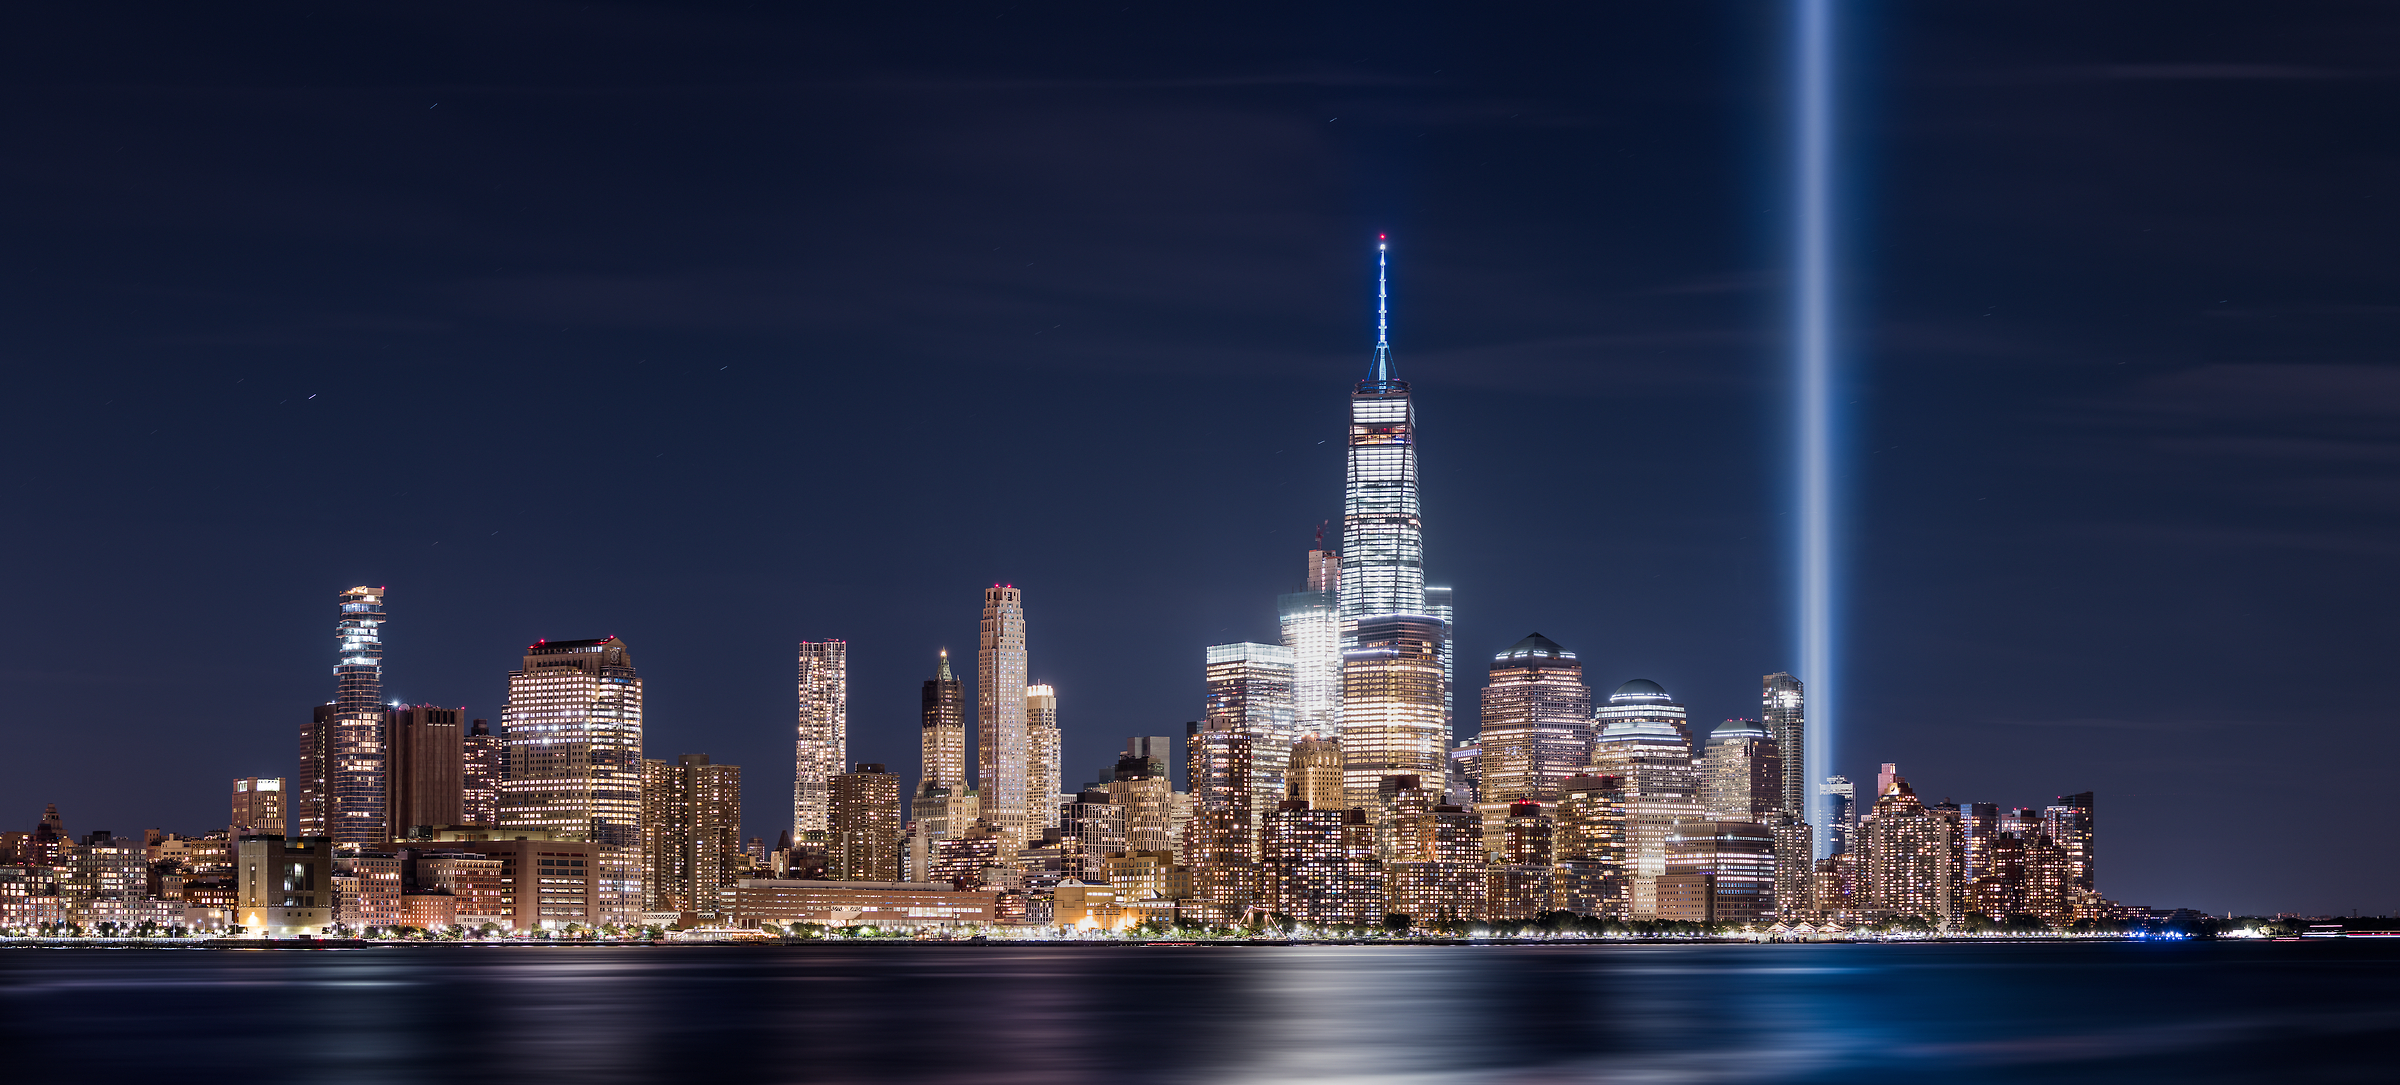 173 megapixels! A very high definition VAST photo of the September 11th 9/11 Tribute in Light memorial, the World Trade Center, and the Manhattan city skyline in New York City; created by Dan Piech